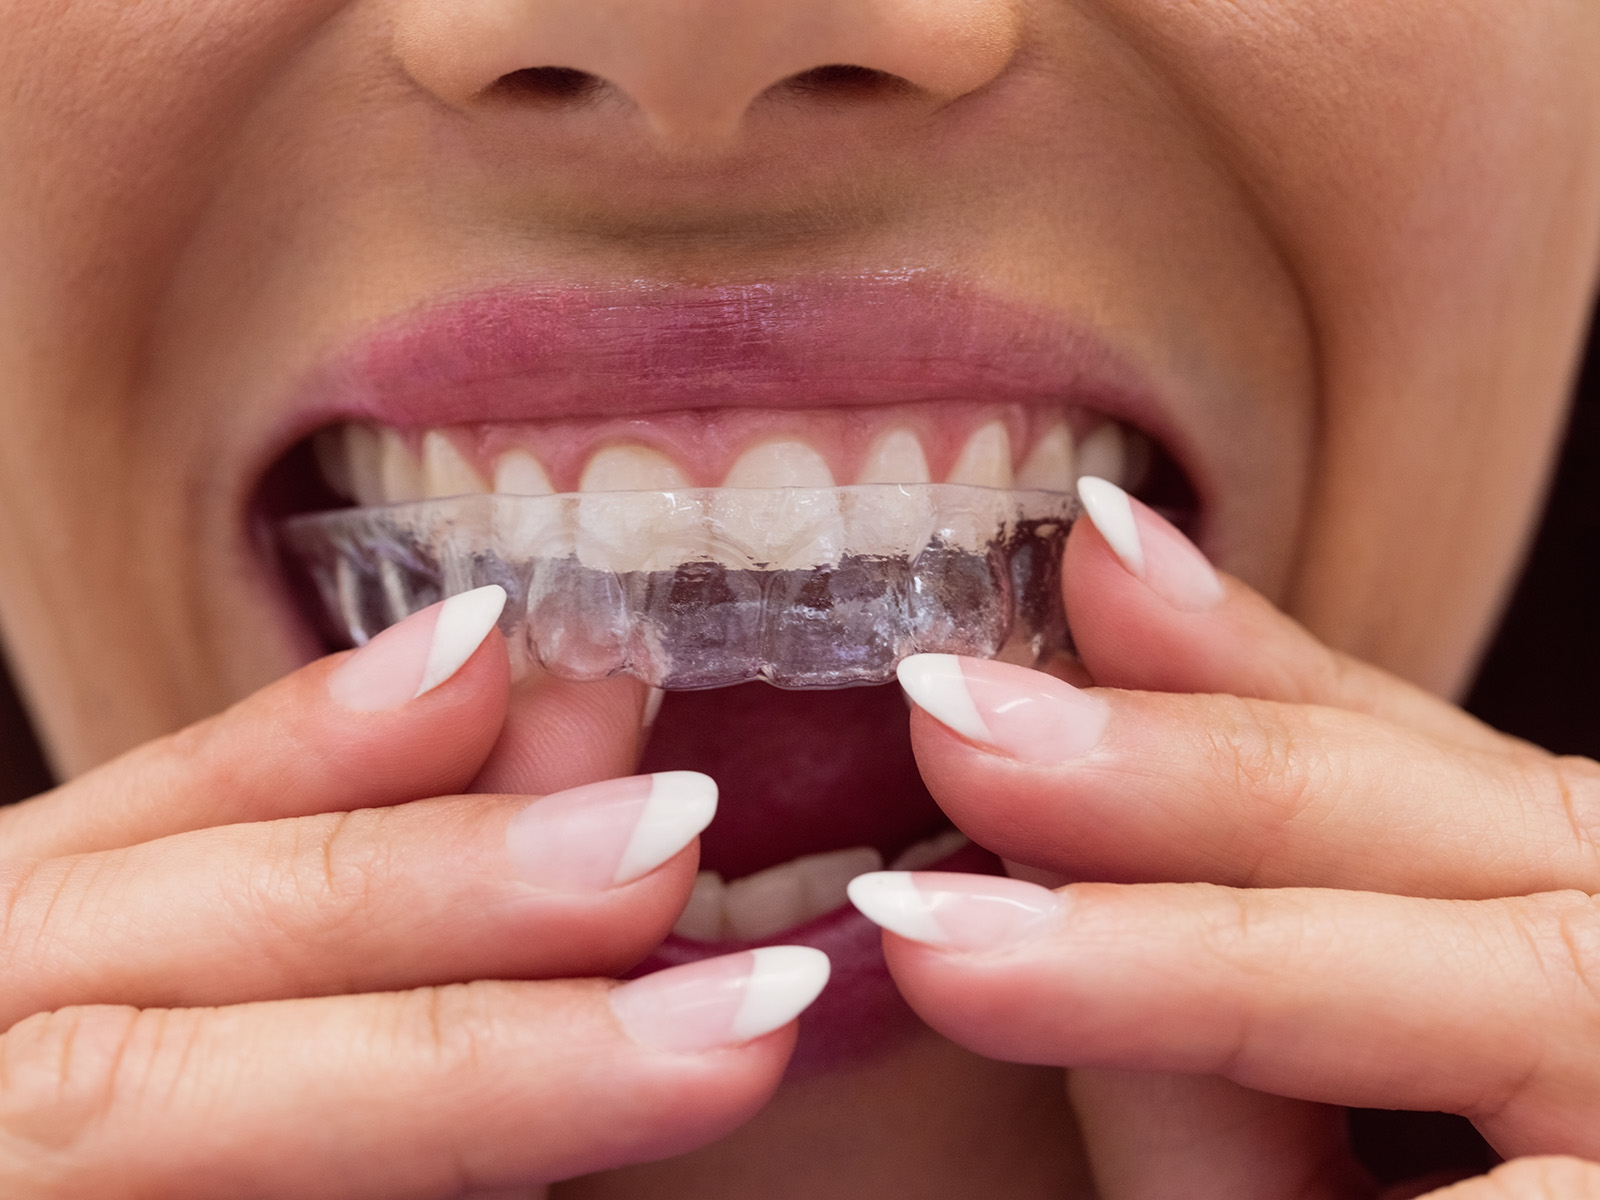 What Should I Do If My Invisalign Aligner Doesn’t Fit?